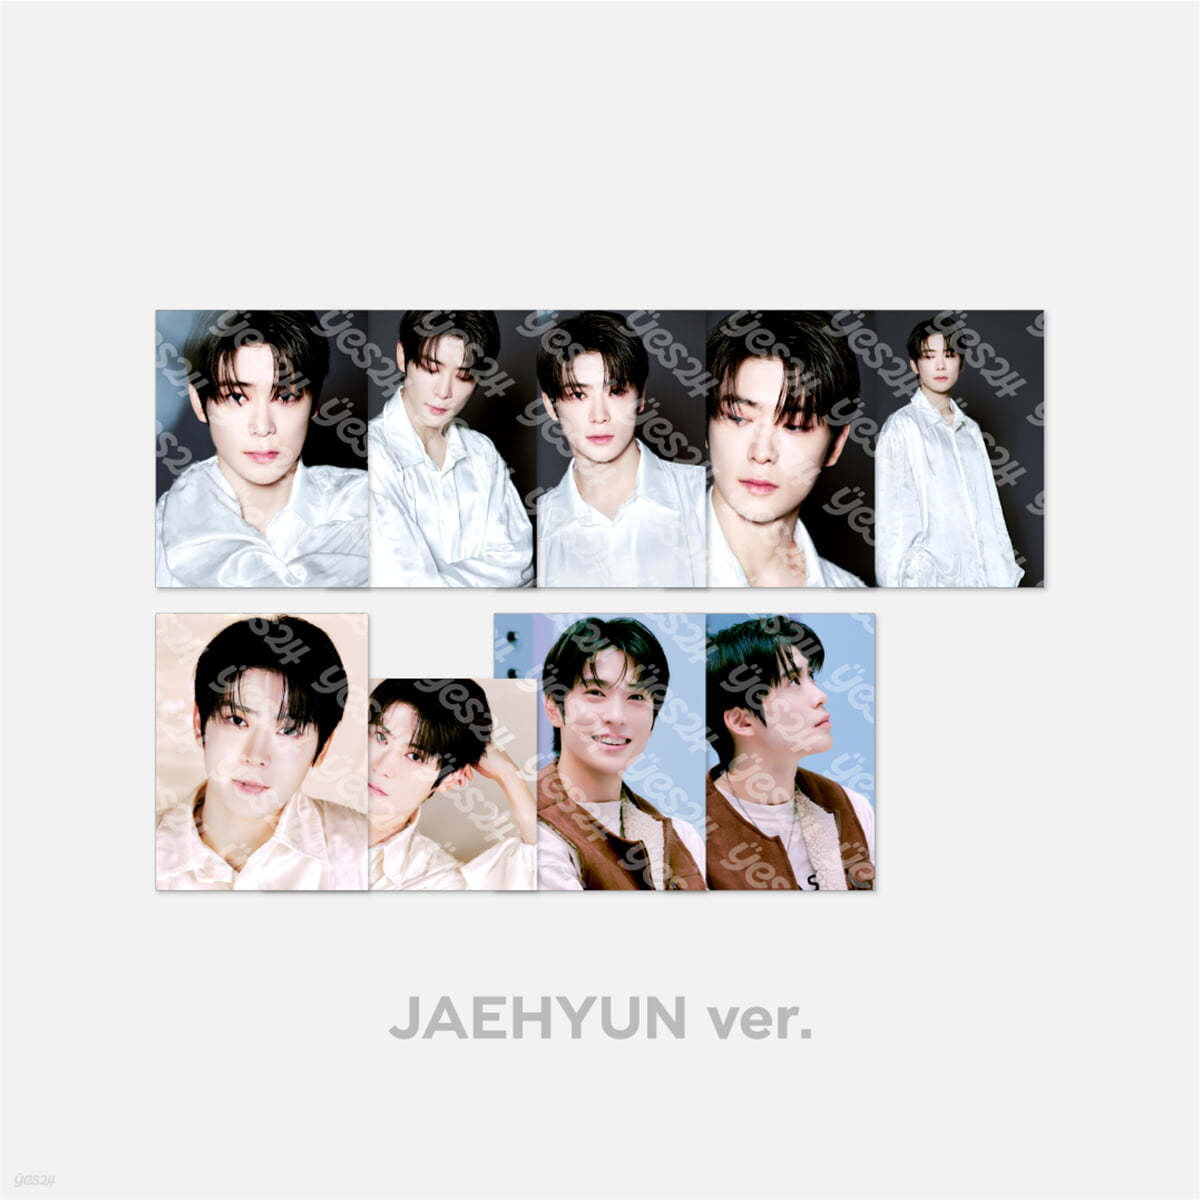 [NCT 127 3RD CONCERT 'THE UNITY'] PHOTO PACK [재현 ver.]